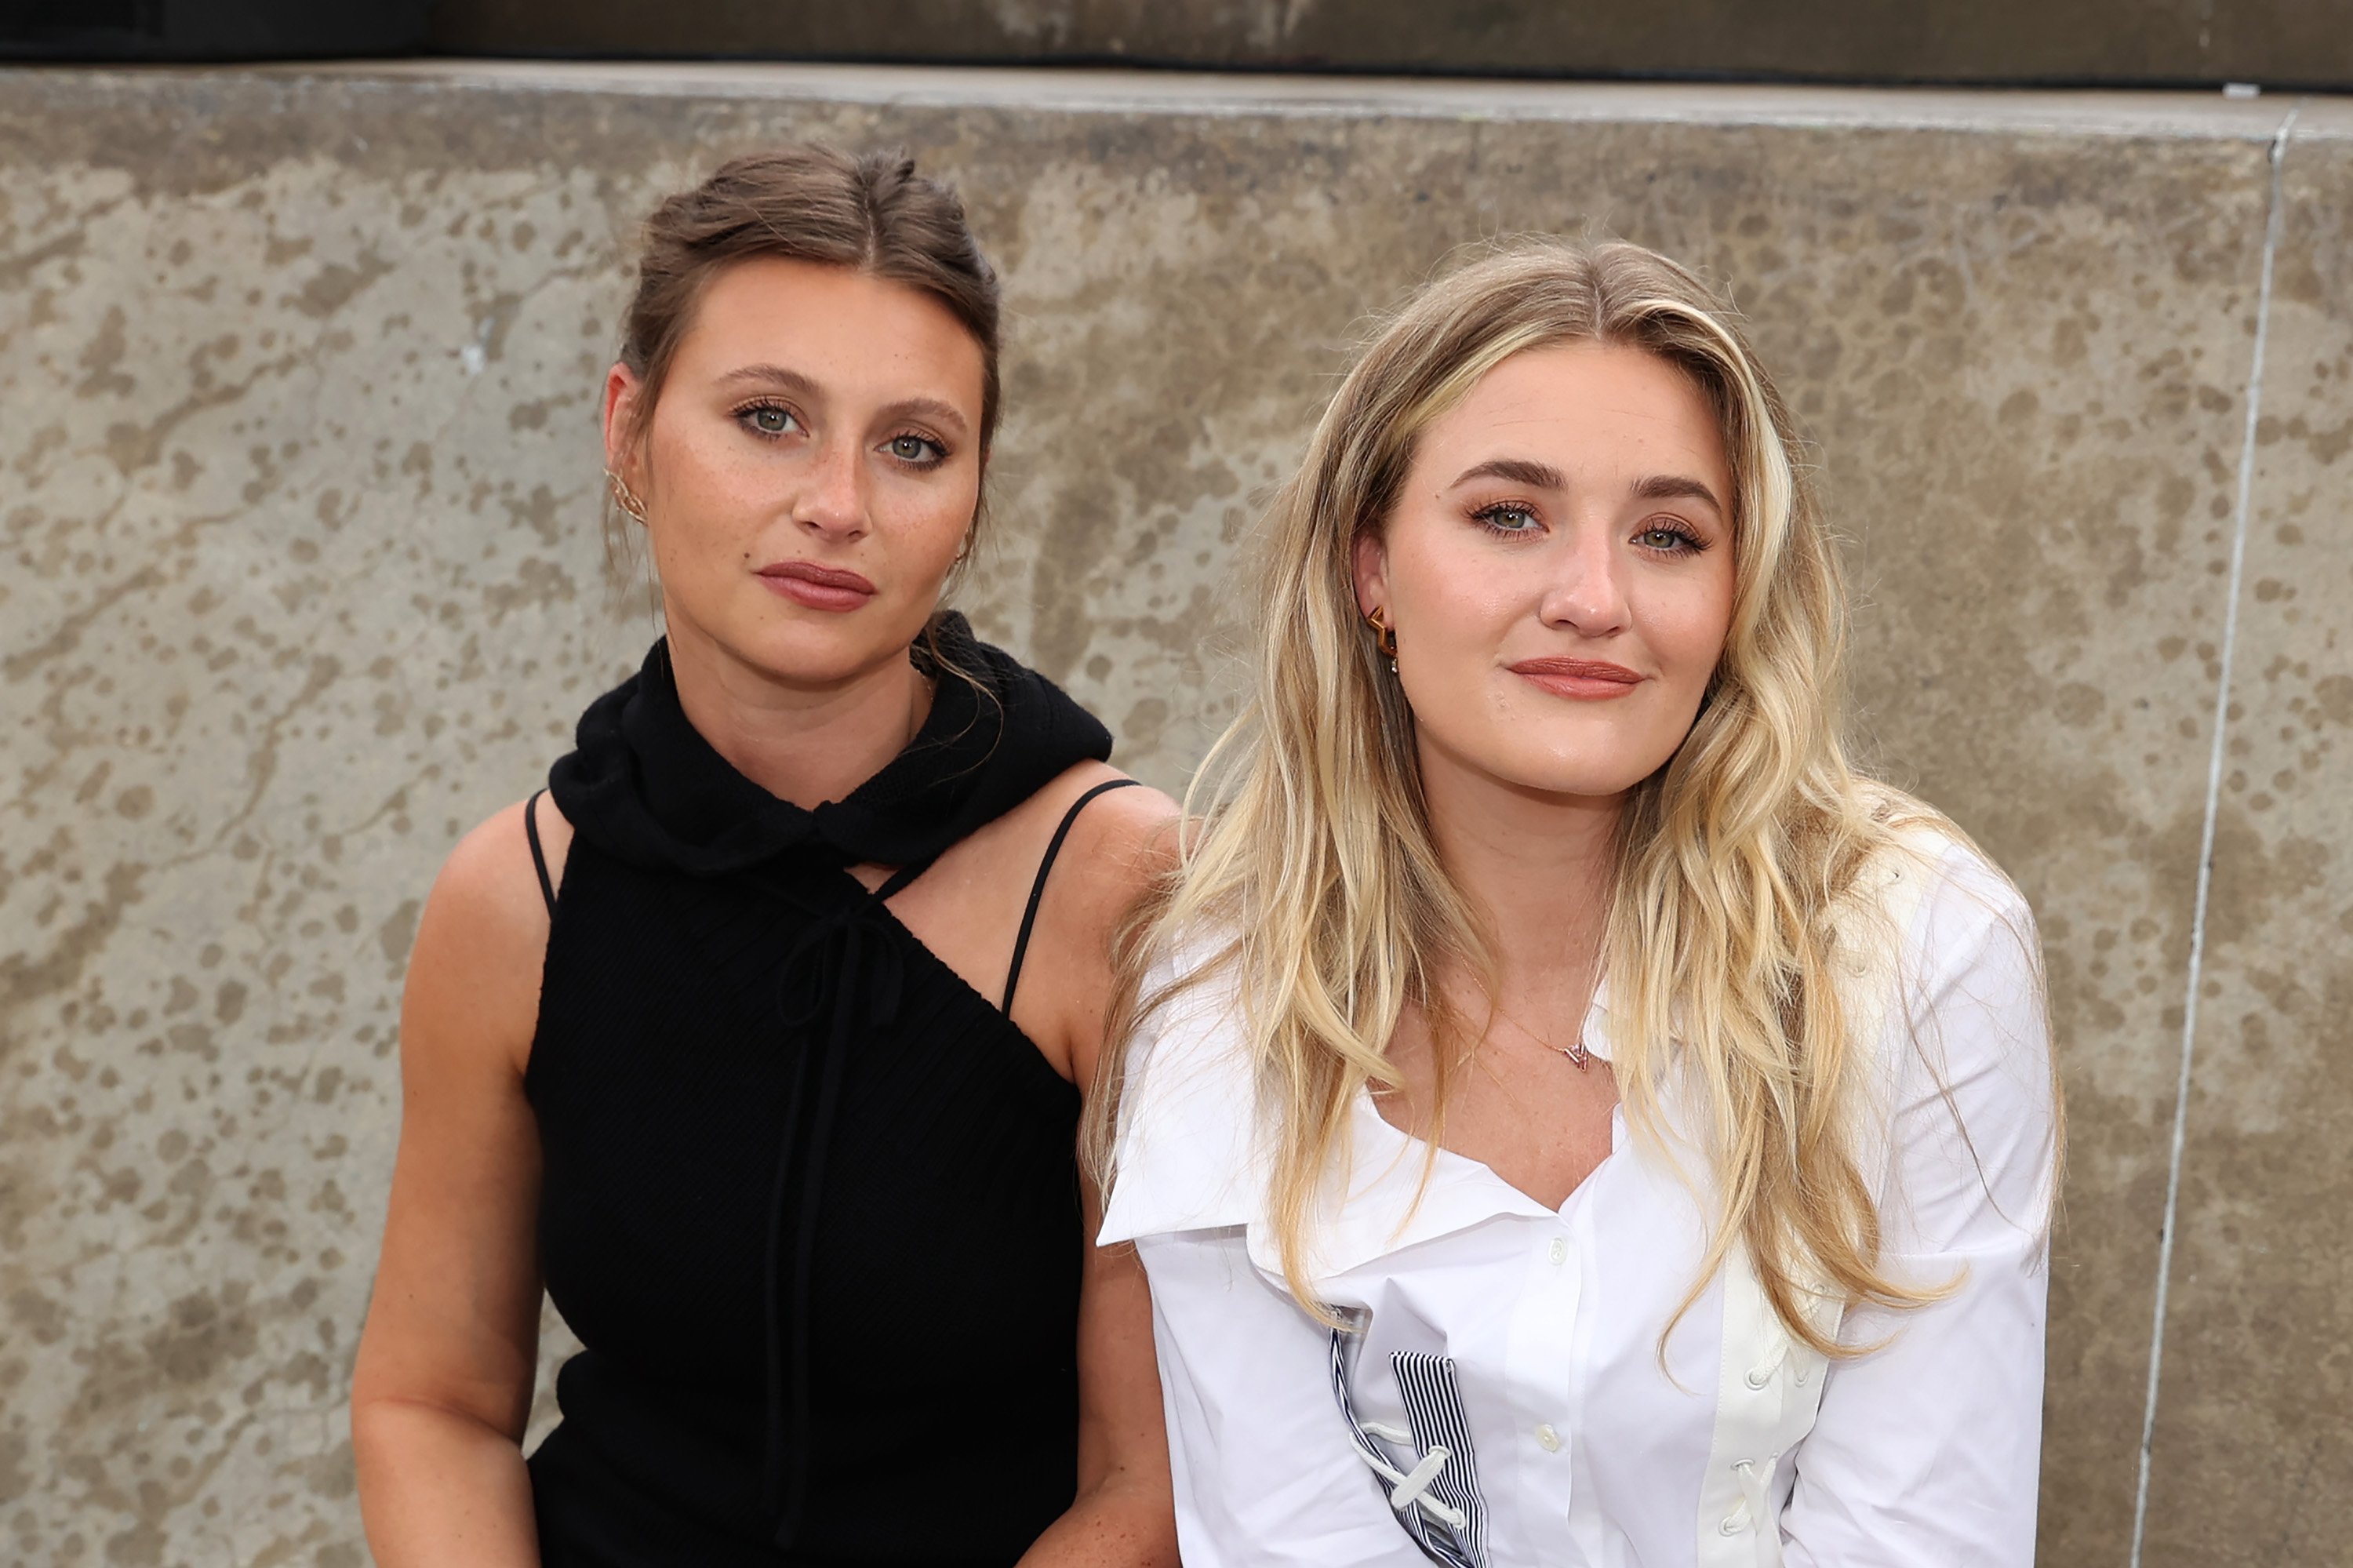 Aly Michalka and AJ Michalka of Aly & AJ attend front row for Monse Resort 22 during NYFW